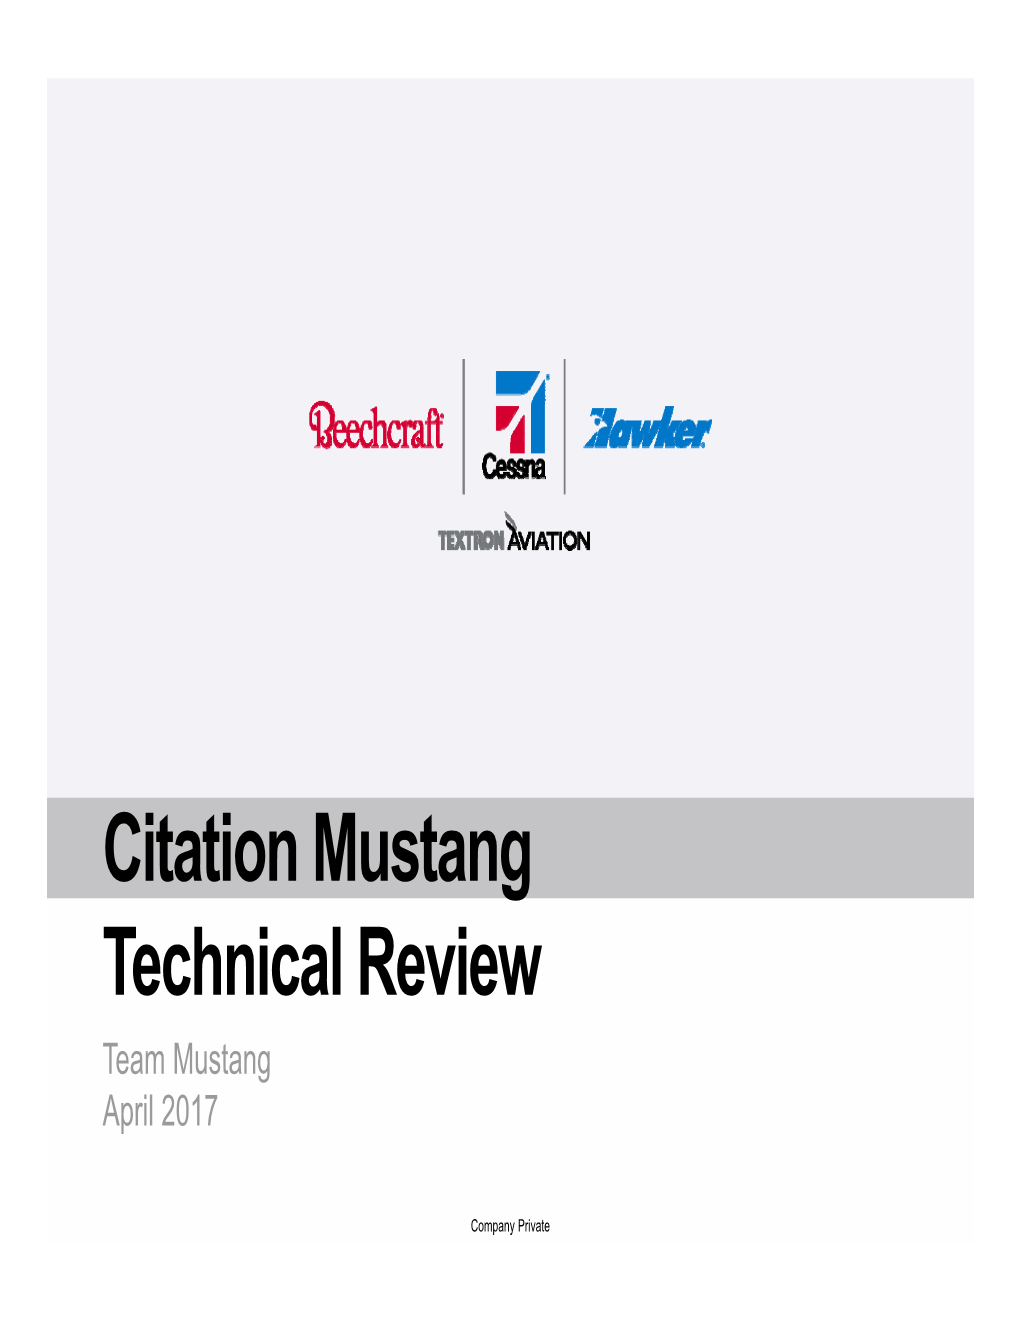 Citation Mustang Technical Review Team Mustang April 2017